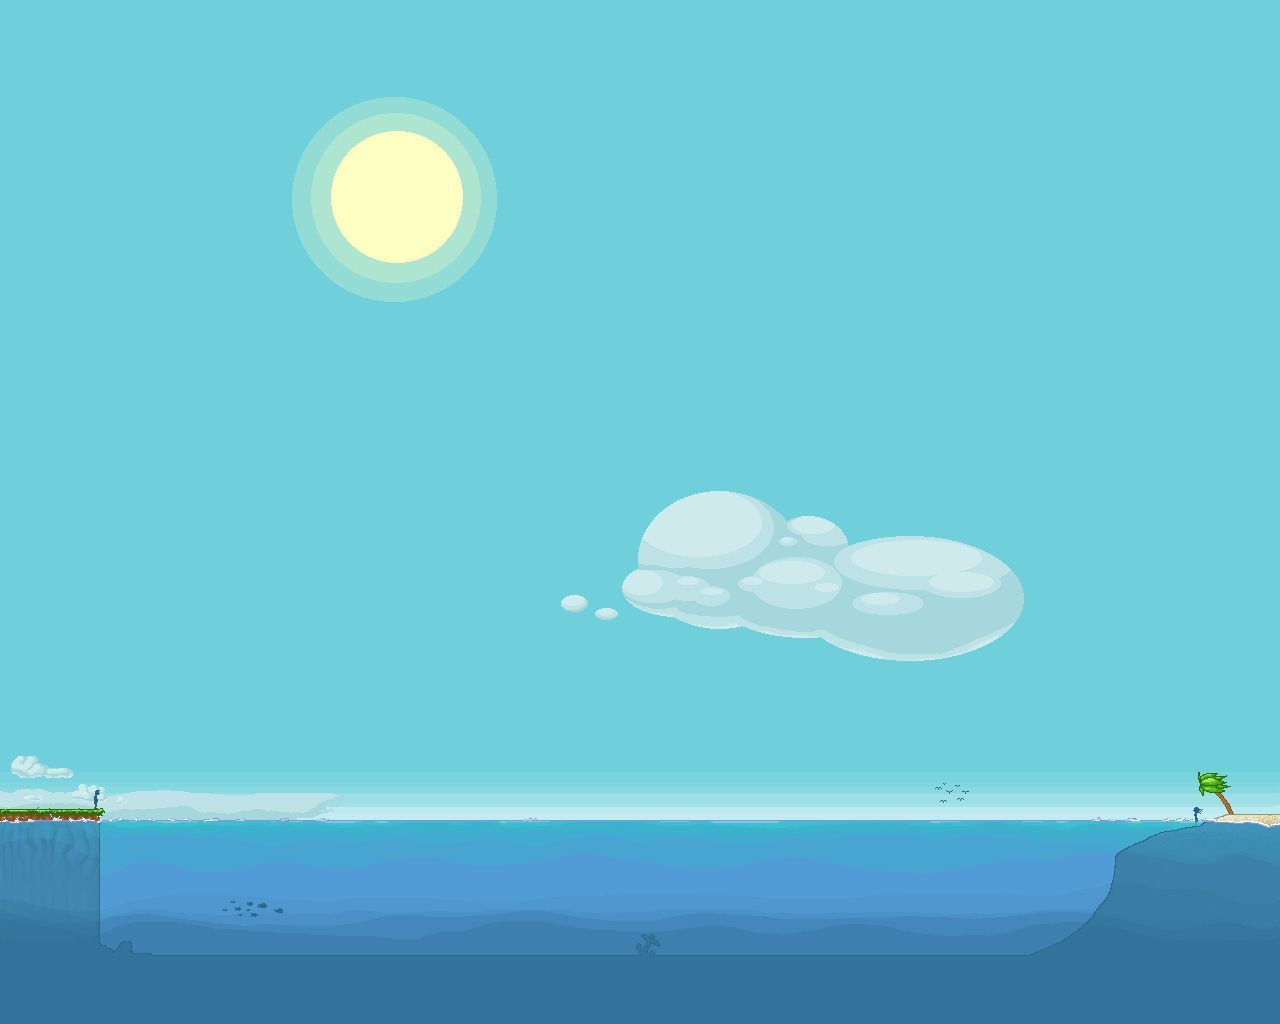 A cartoon of two people on an island - 1280x1024